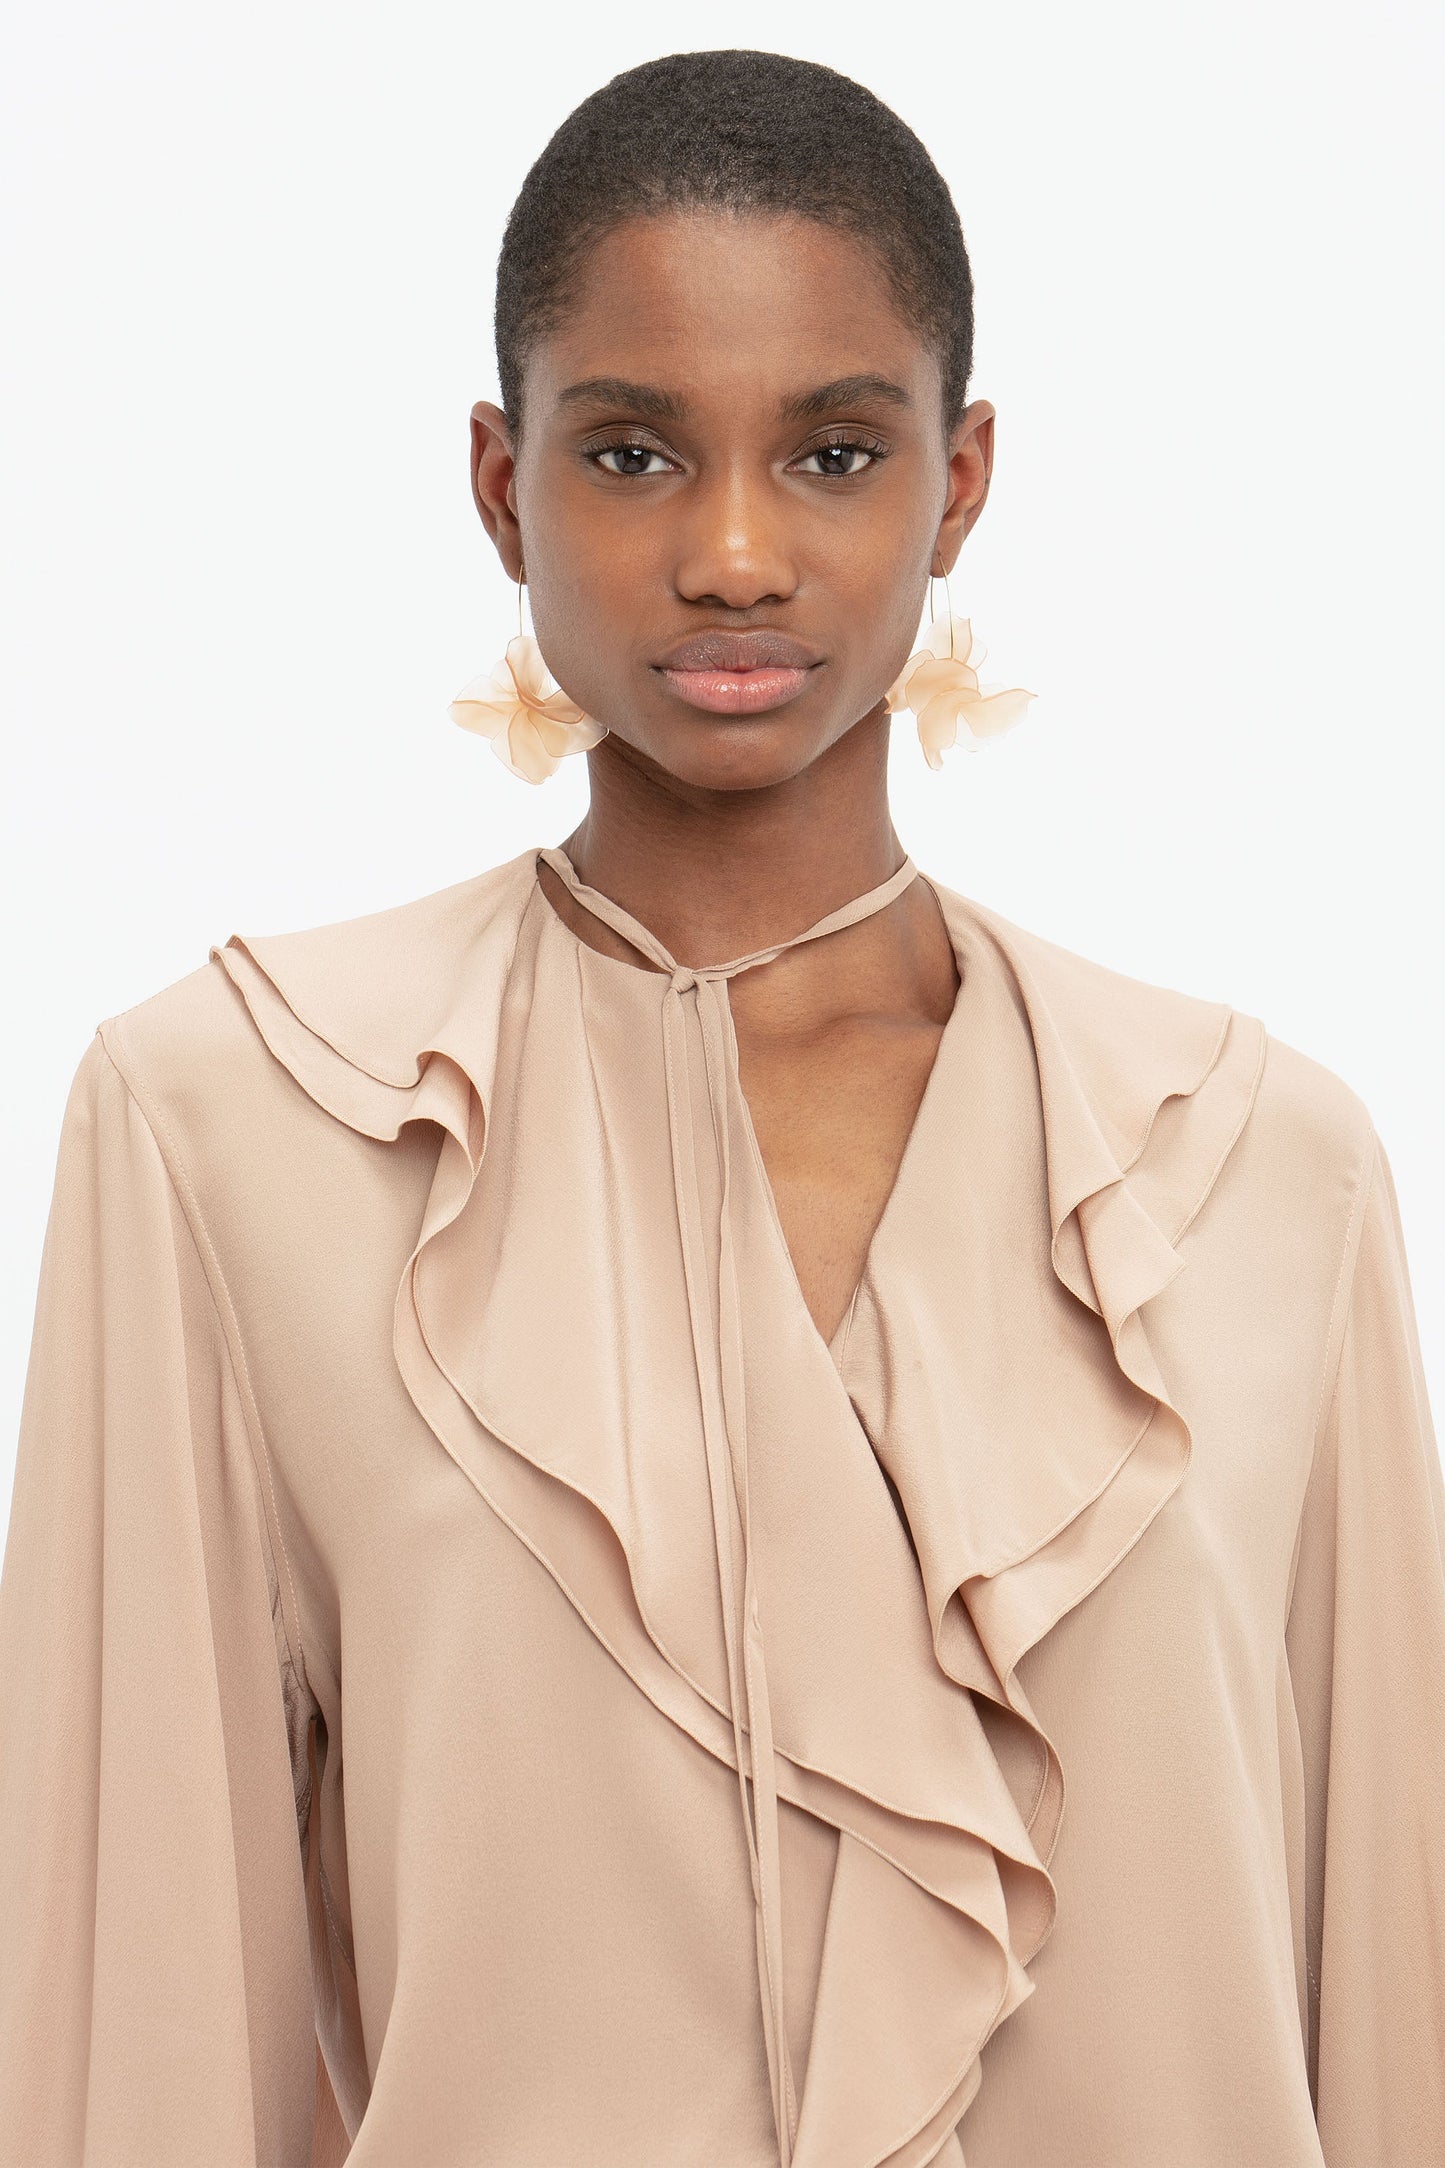 Romantic Blouse In Taupe